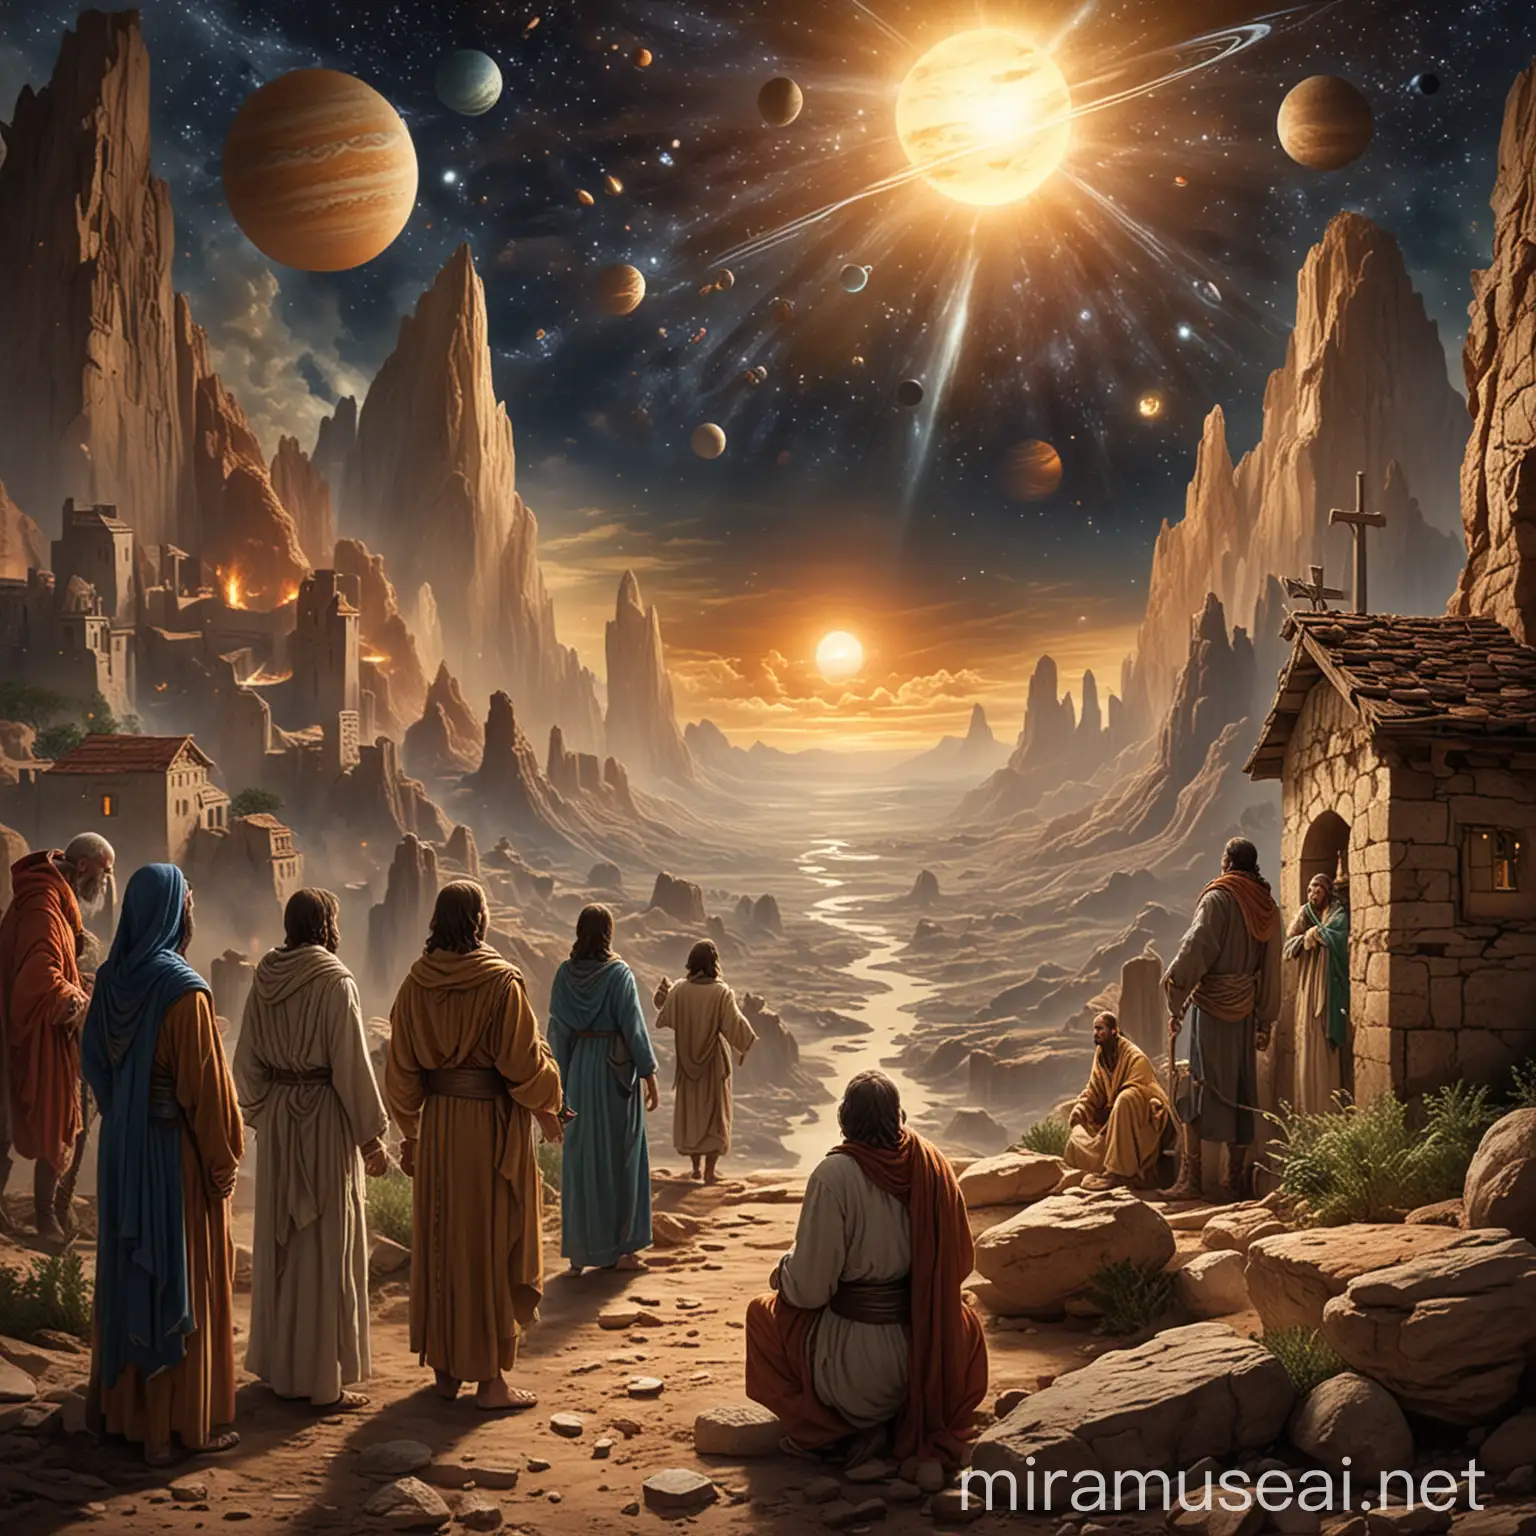 Astrological Revelation Unveiling the Savior as the Seven Planets Align